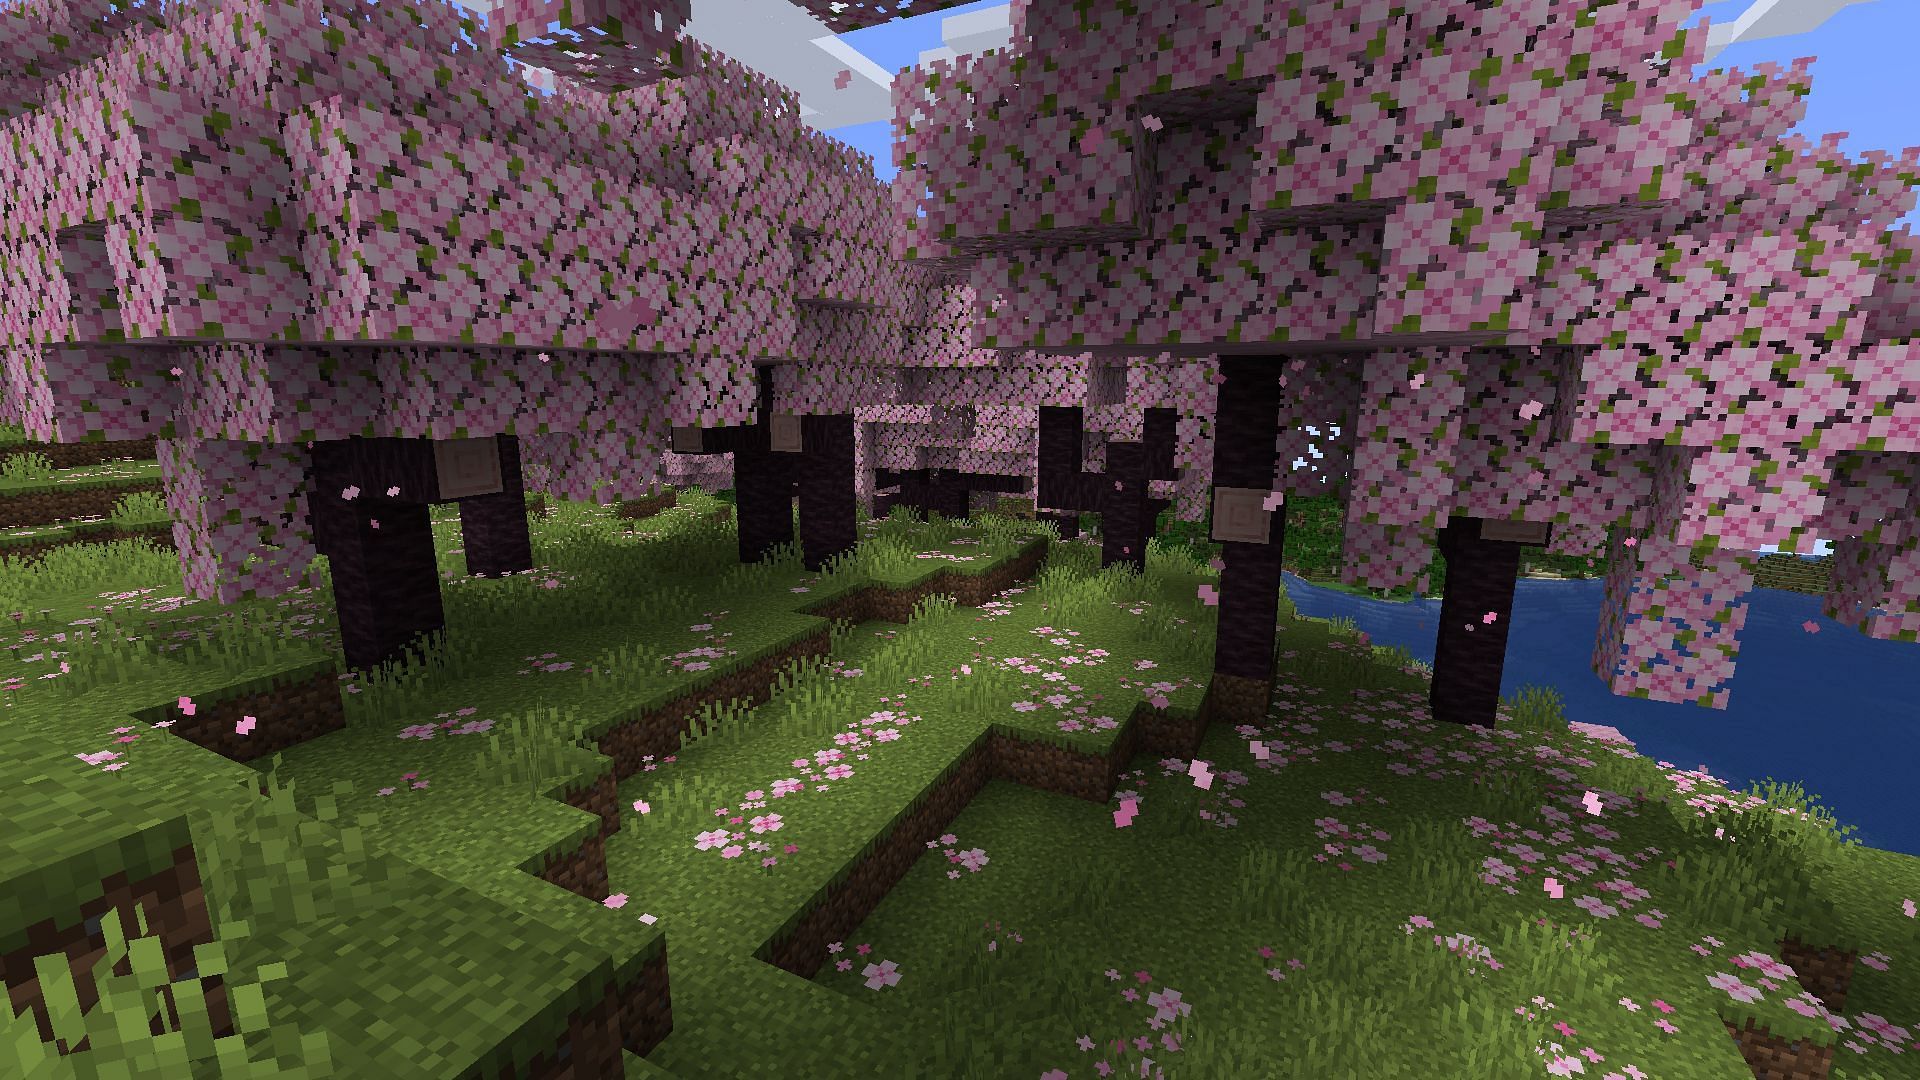 The right seed should provide Minecraft Java fans with easy access to the 1.20 update